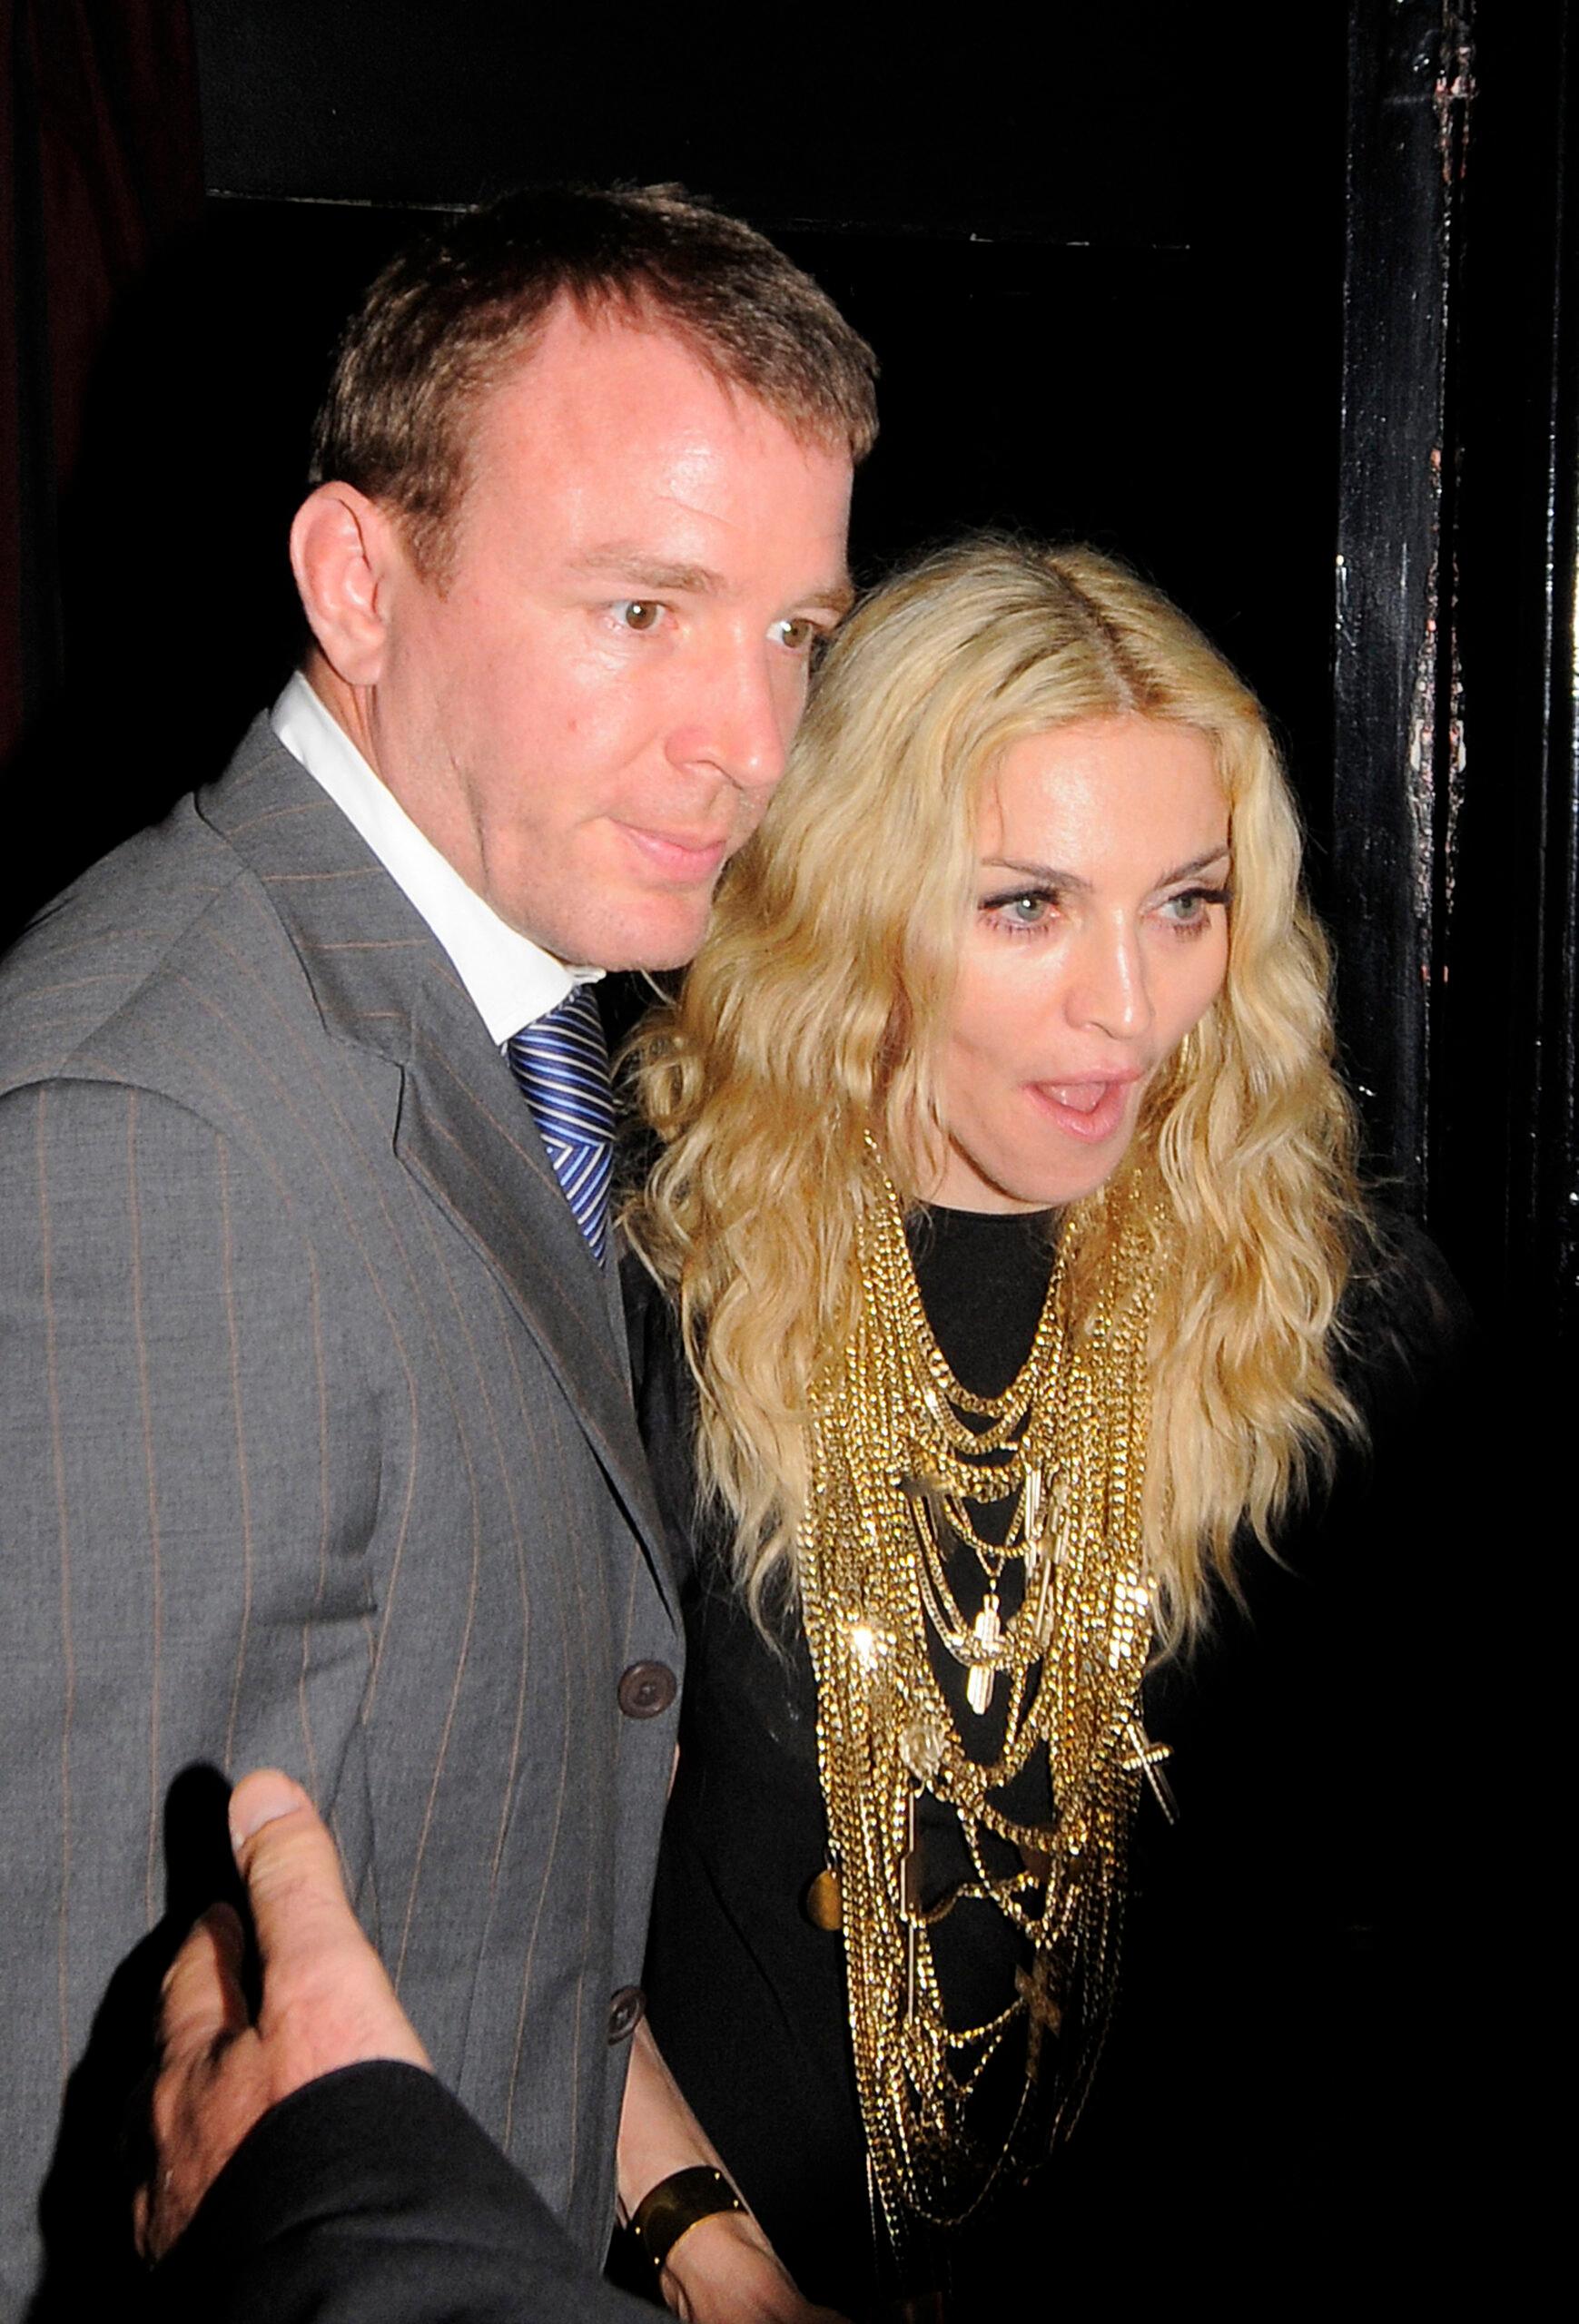 Guy Ritchie and Madonna enjoy night out at Volstead Nightclub